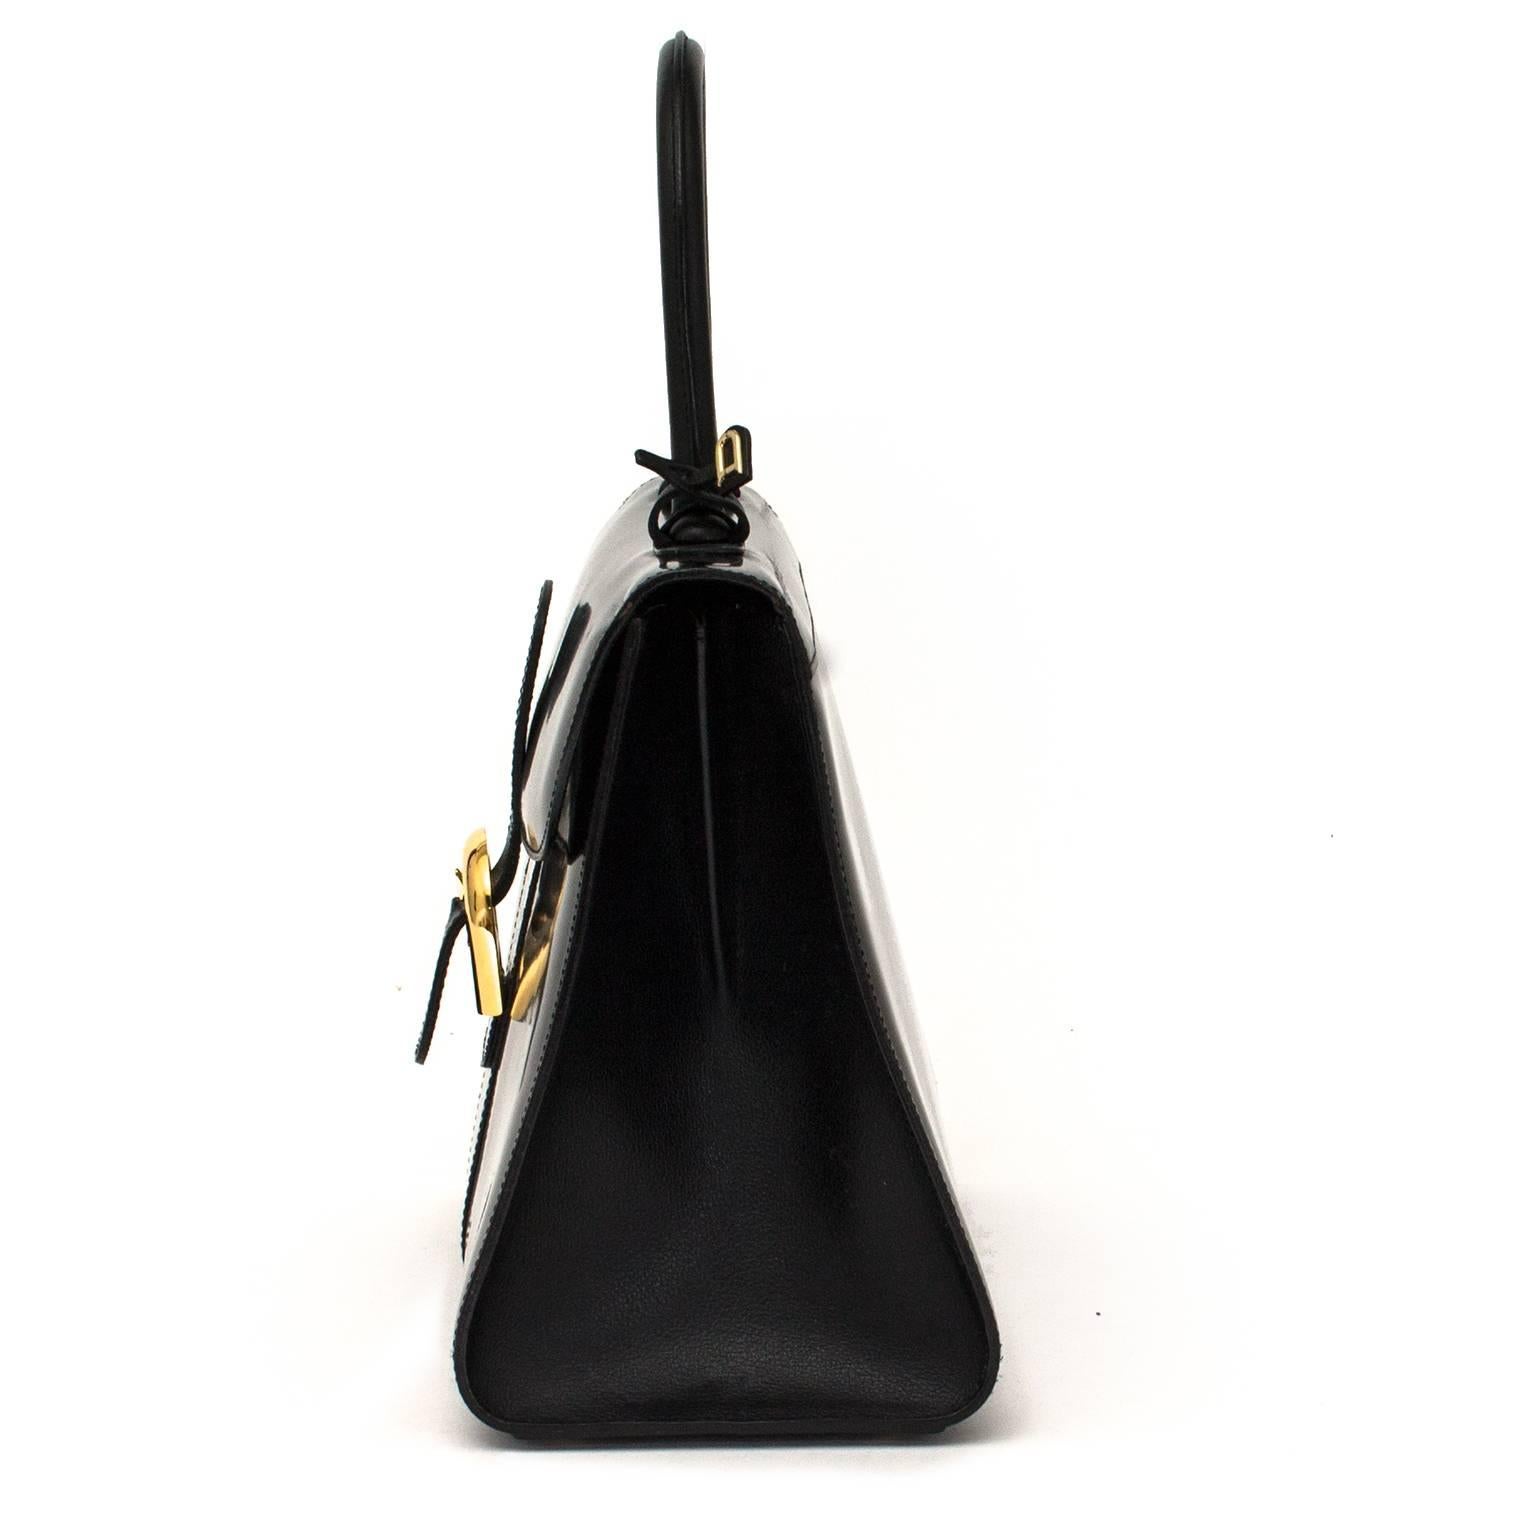 This beautiful elegant model comes in a beautiful shiny black leather. The bag features gold-toned hardware and the authentic ‘D’ hangtag. The inside contains a slip pocket with zip fastening and a little pocket for your pen. The bag comes with the